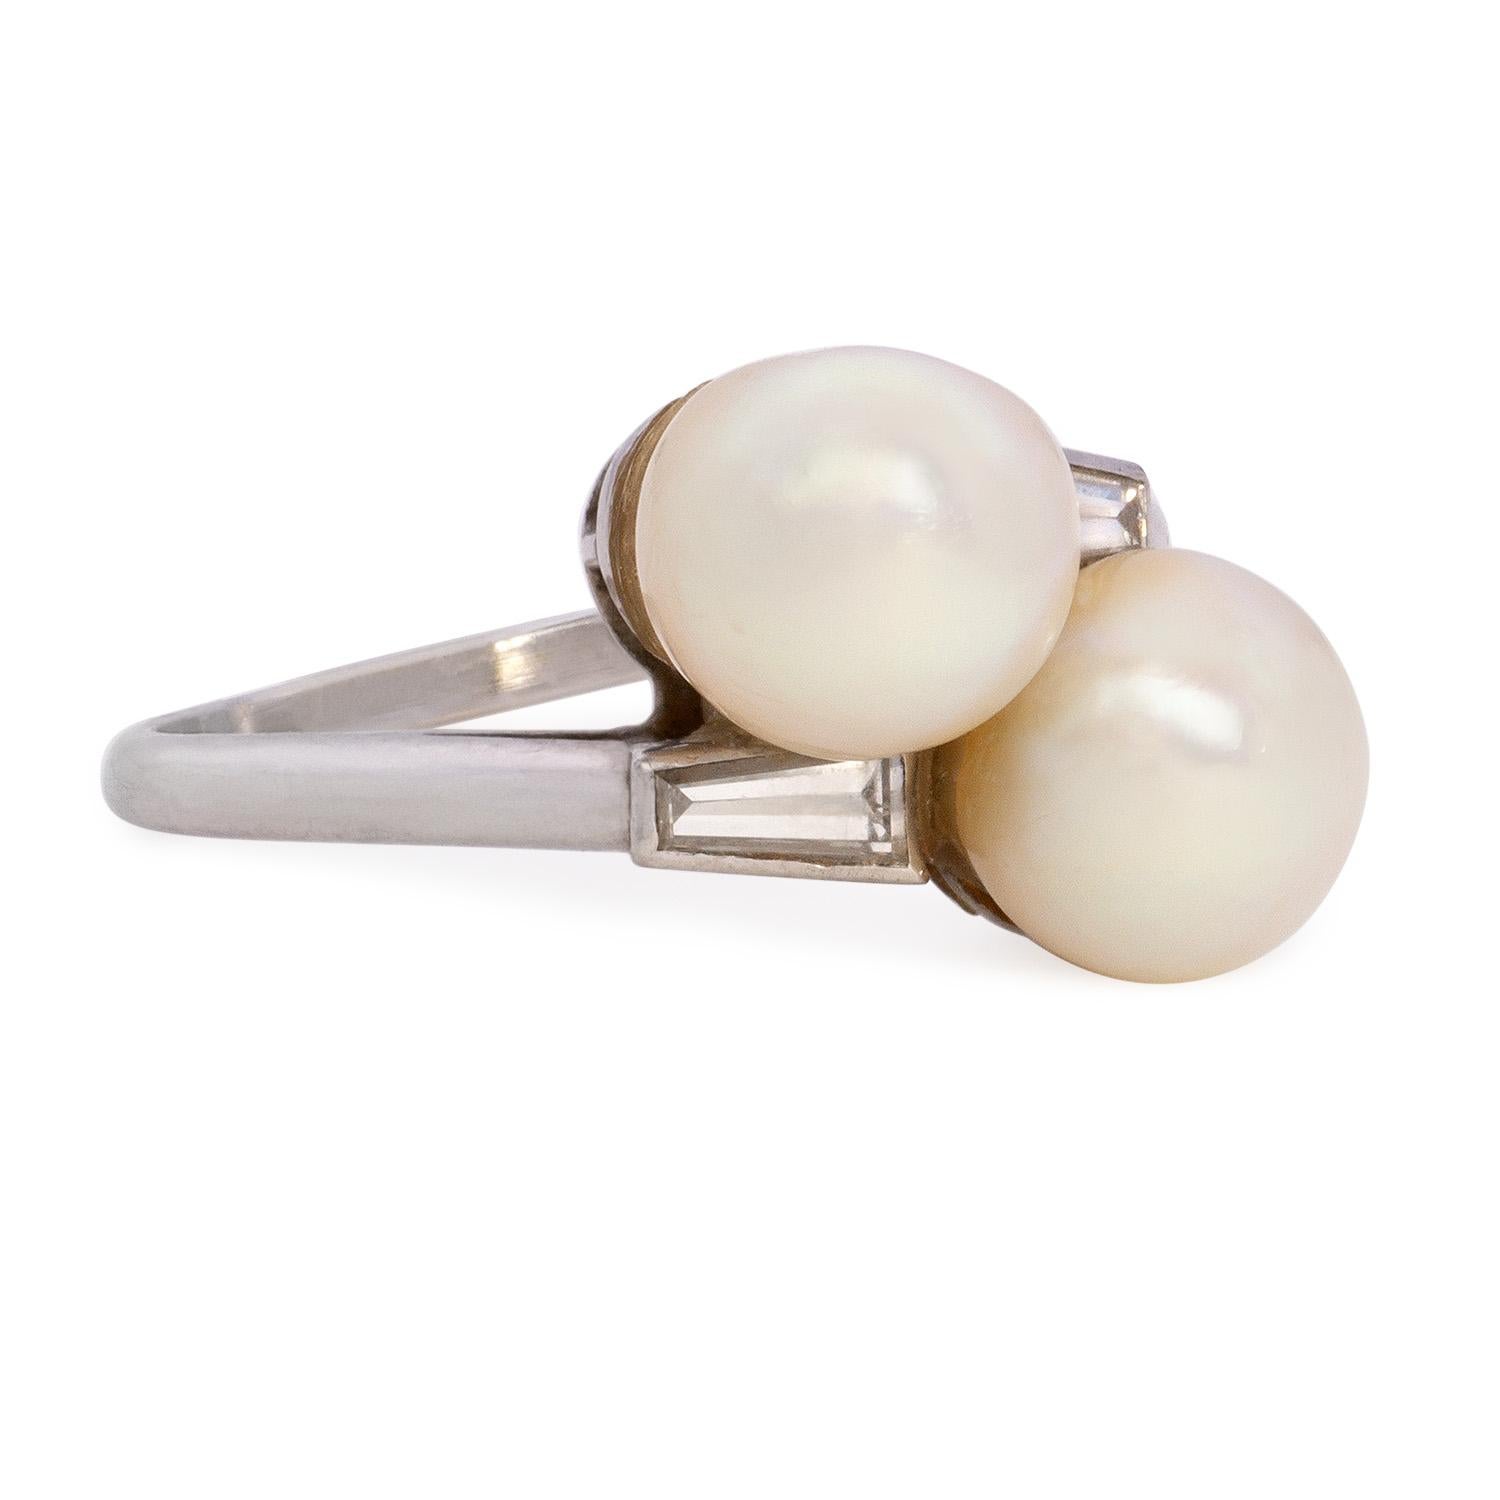 1920s Chaumet Toi Et Moi ring, featuring two natural saltwater pearls crafted in platinum ring. Signed by Chaumet Paris.


Gemstone Information
 Natural Pearls
Shape Round 
Size	7.8-7.3 mm
Origin Treatment Saltwater Natural
Weight 	 
 

Ring